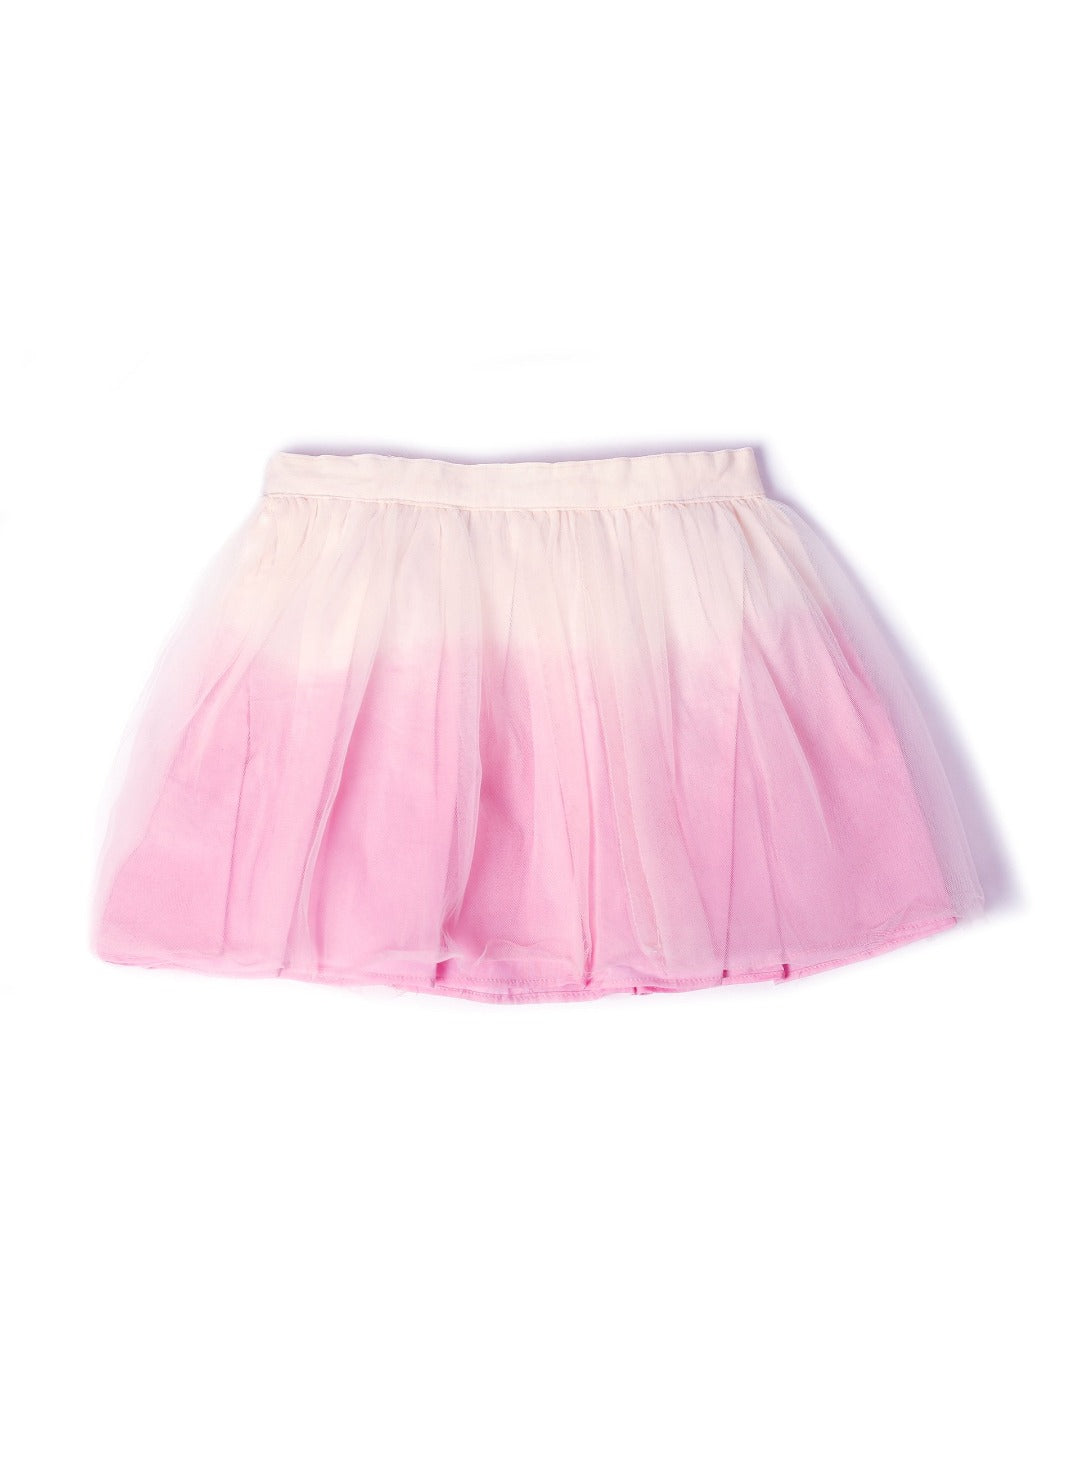 cotton candy pink tulle skirt